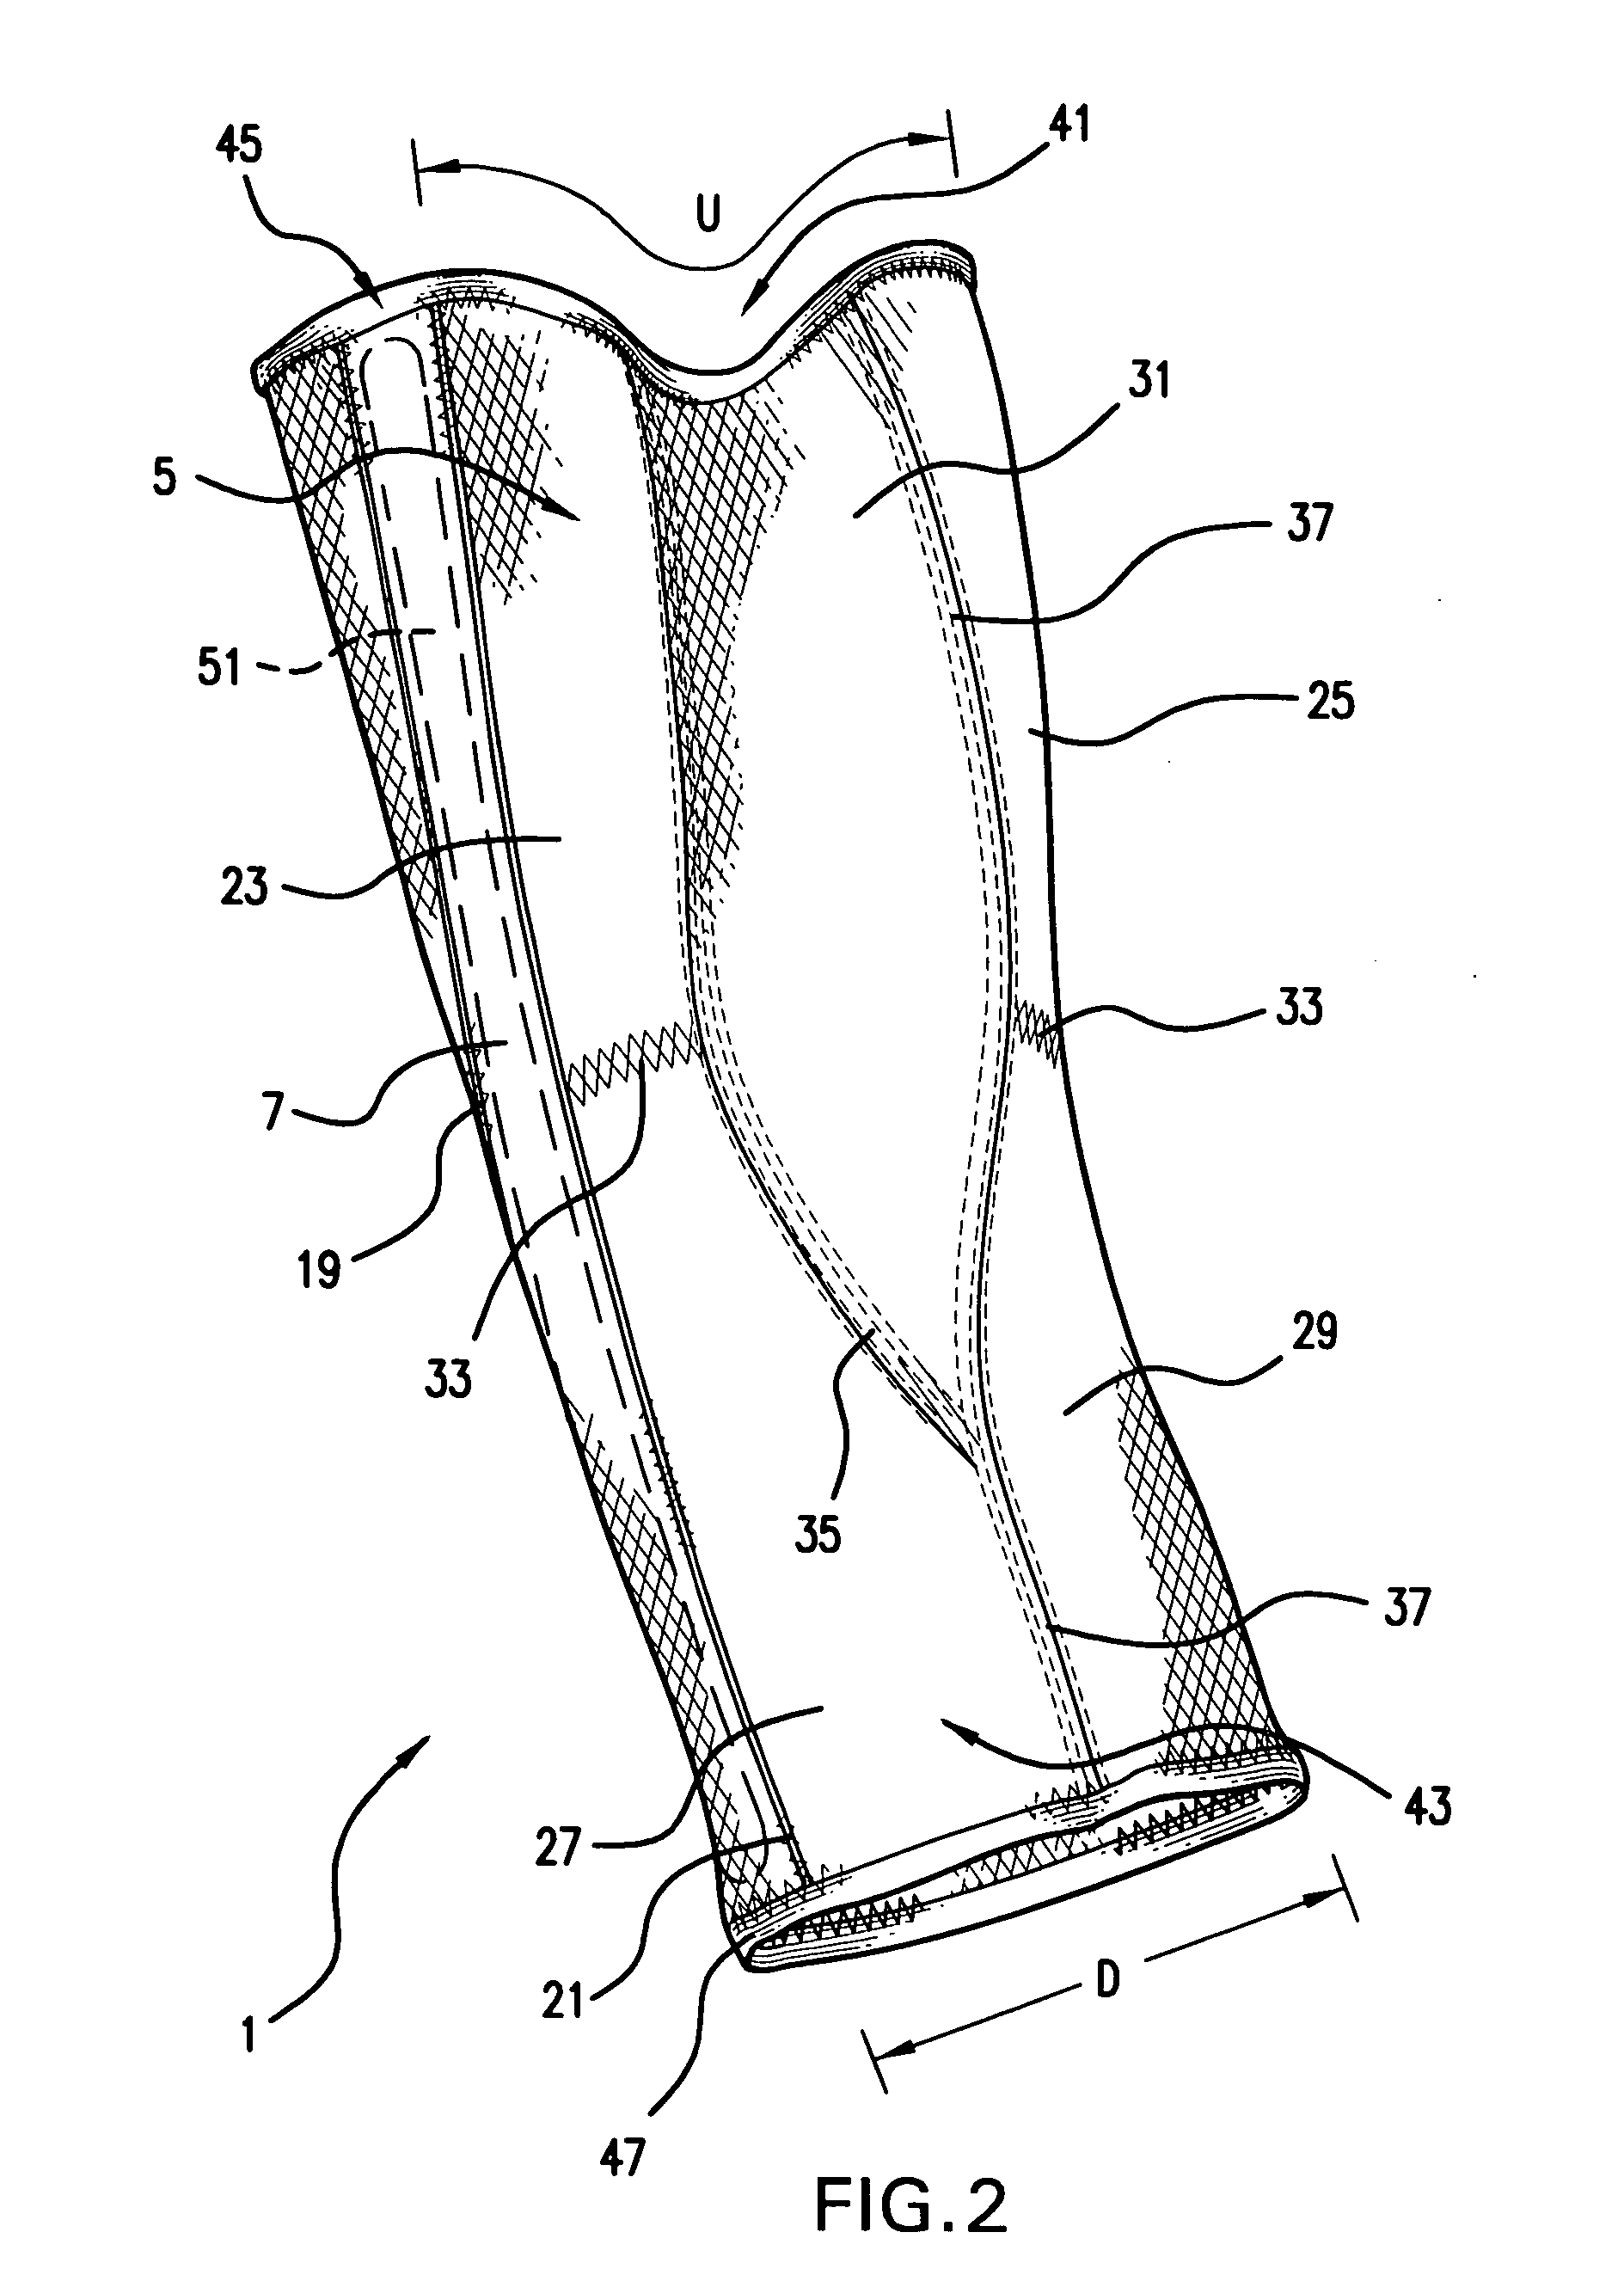 Apparatus for and method of diagnosing and treating patello-femoral misalignment